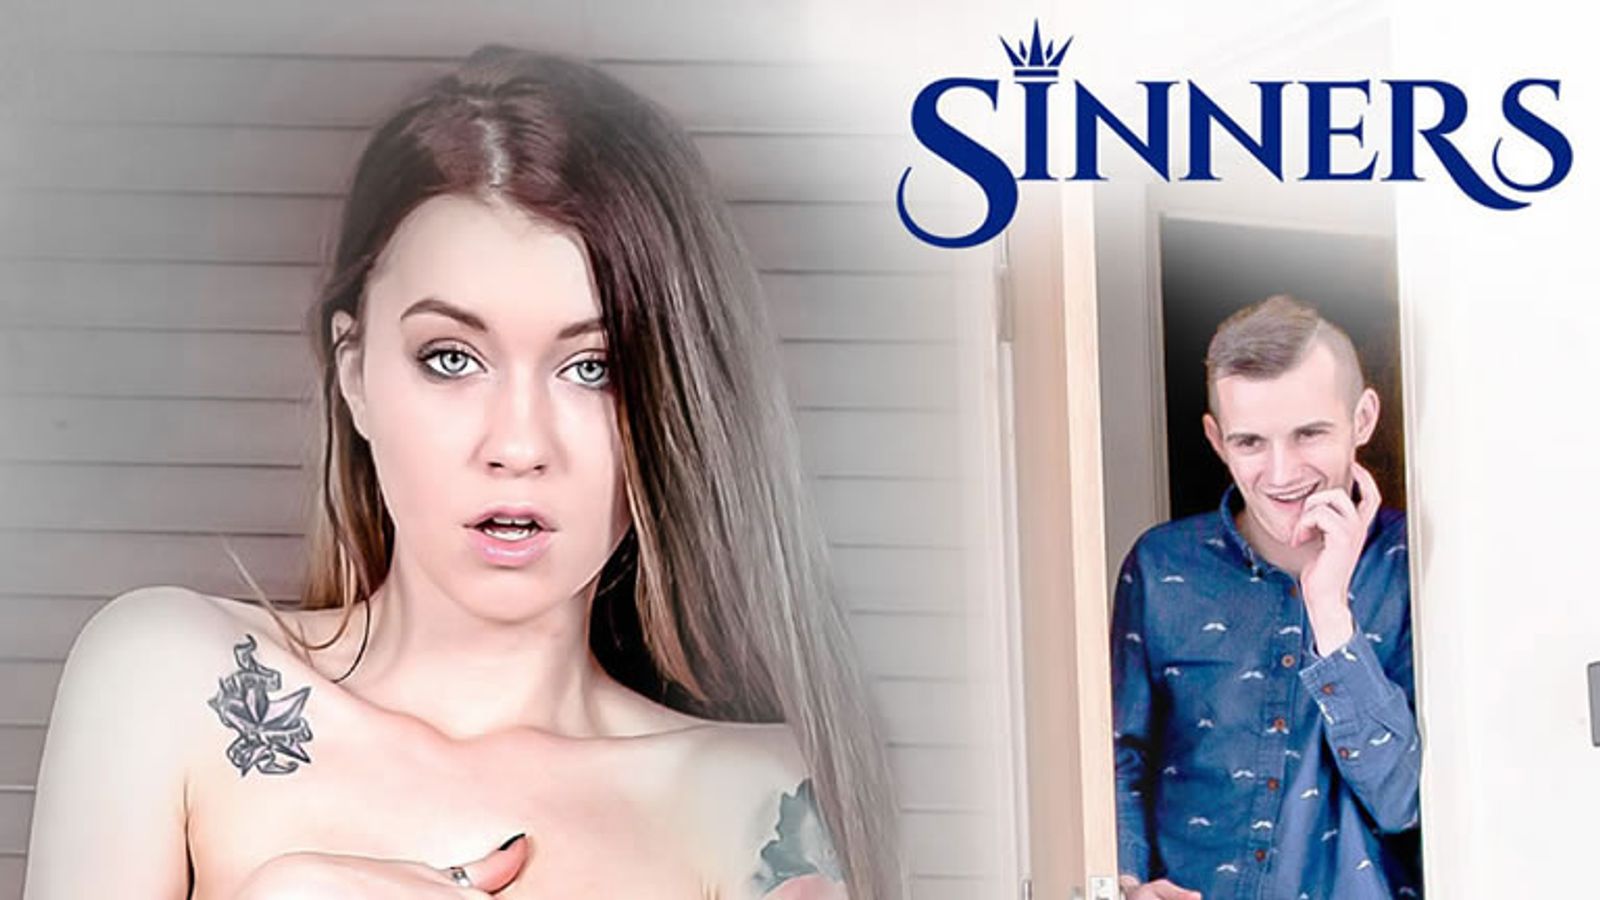 UK Studio Sinners Offers Taste of Taboo With 'Horny Relatives'